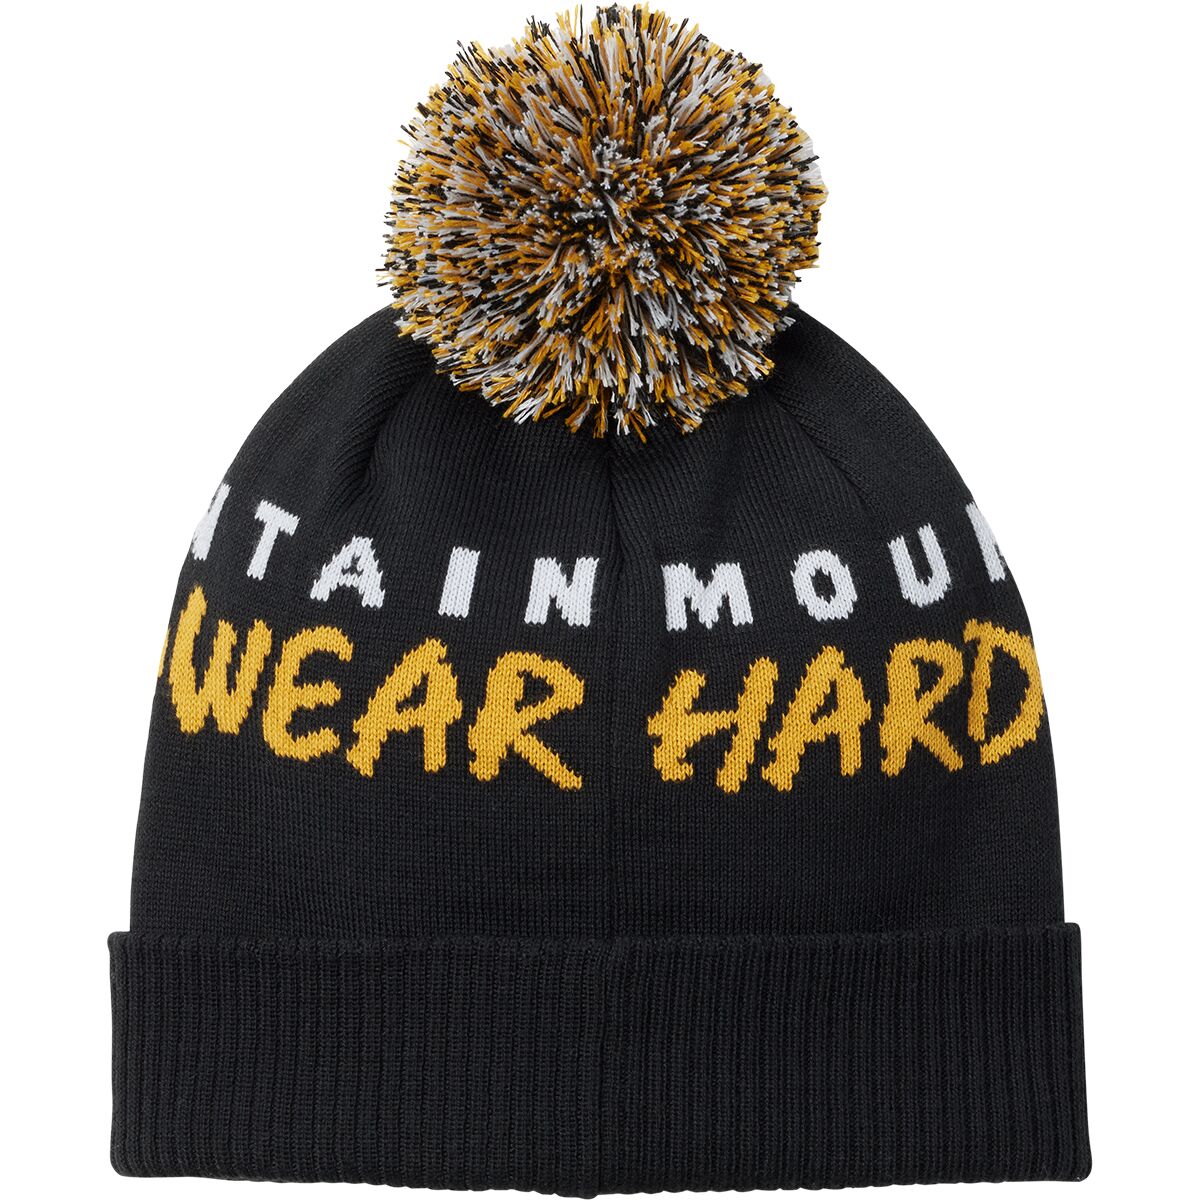 mountain hardwear beanie with black logo - OFF-58% >Free Delivery